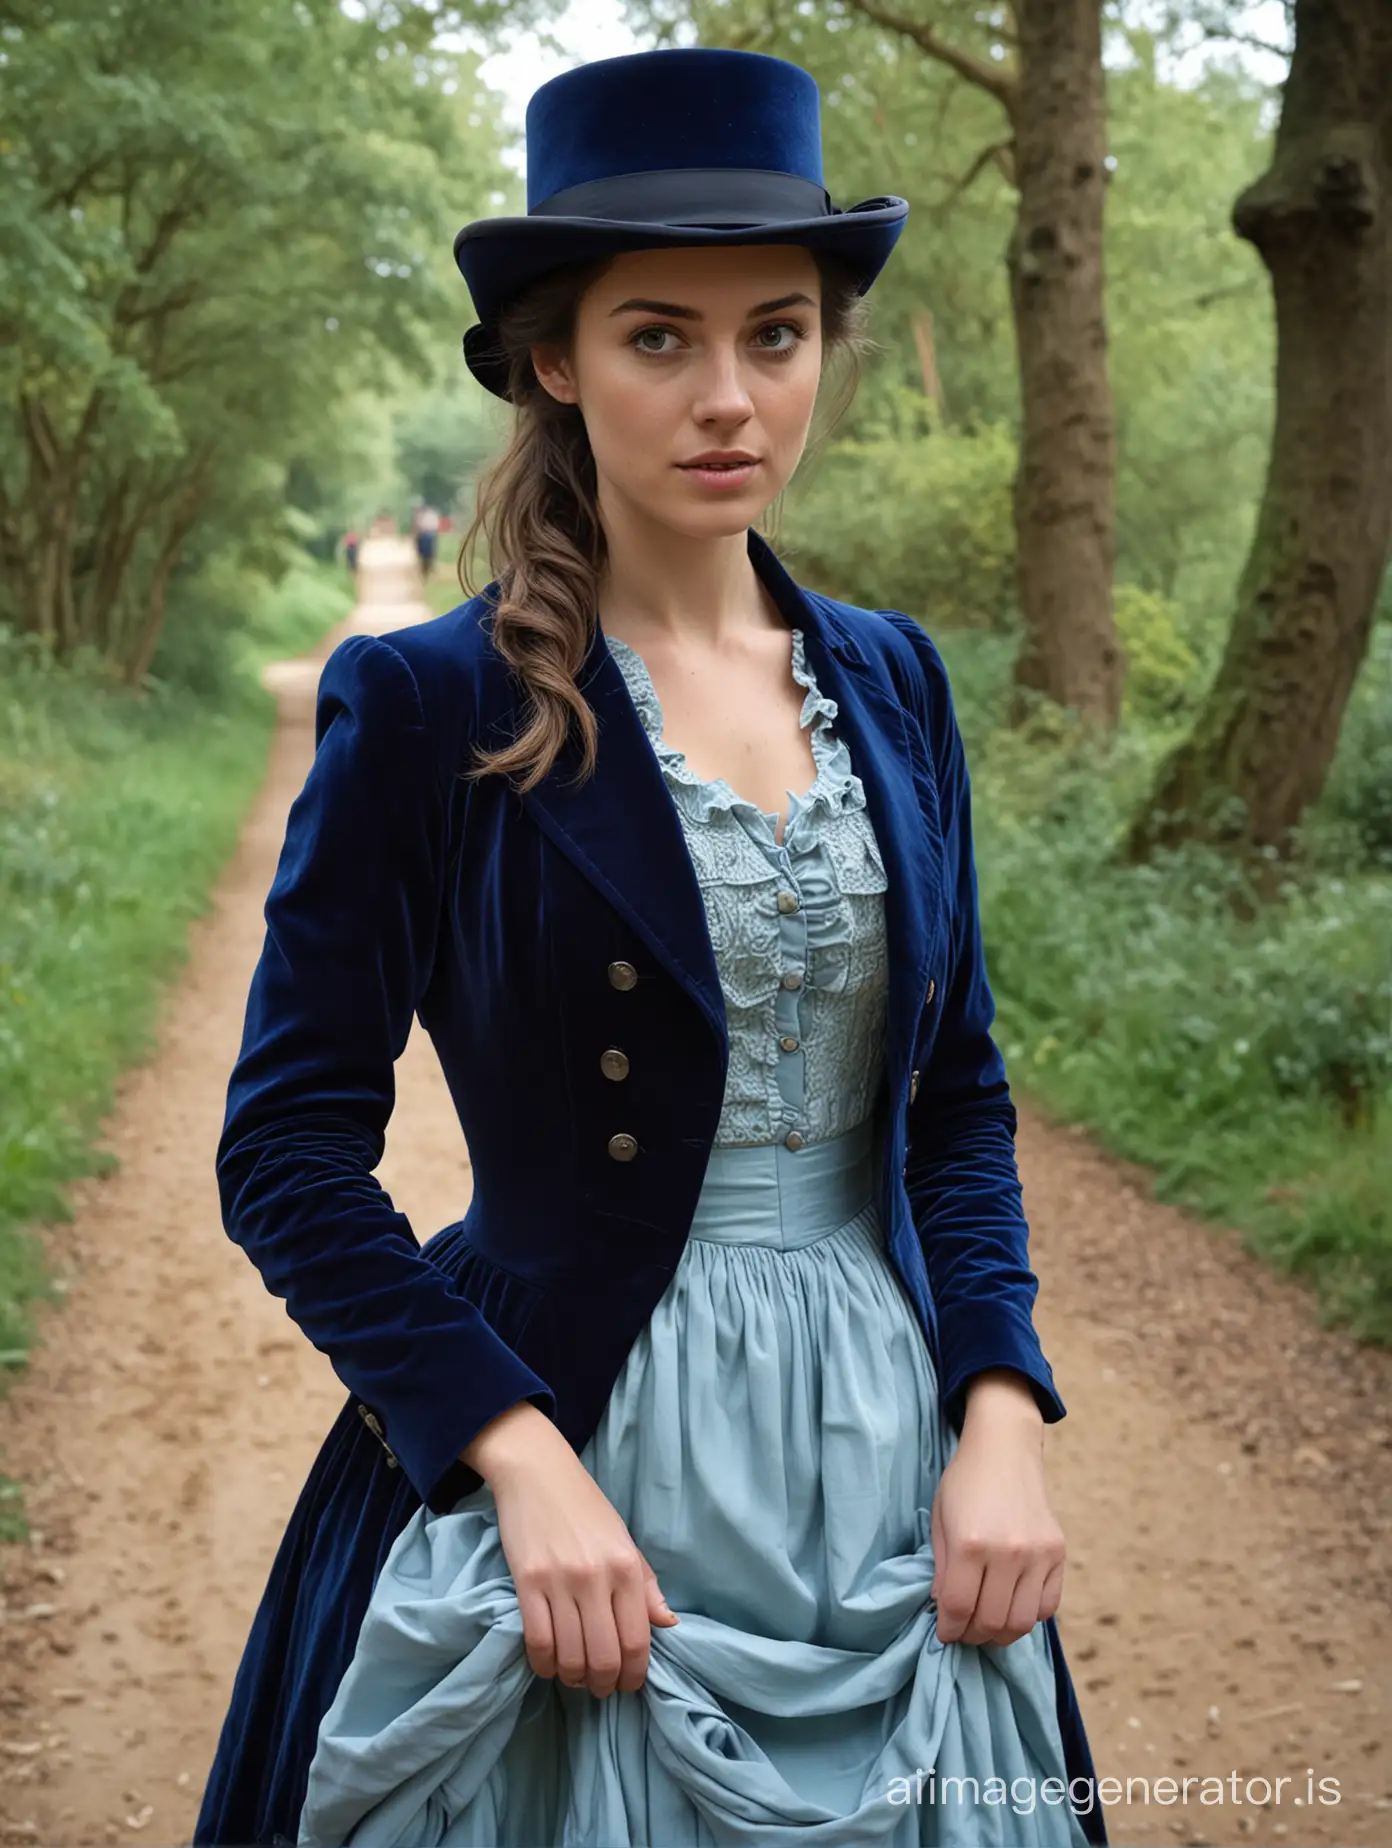 Refined-Regency-Lady-Riding-Horse-in-Forest-with-Wistful-Glance